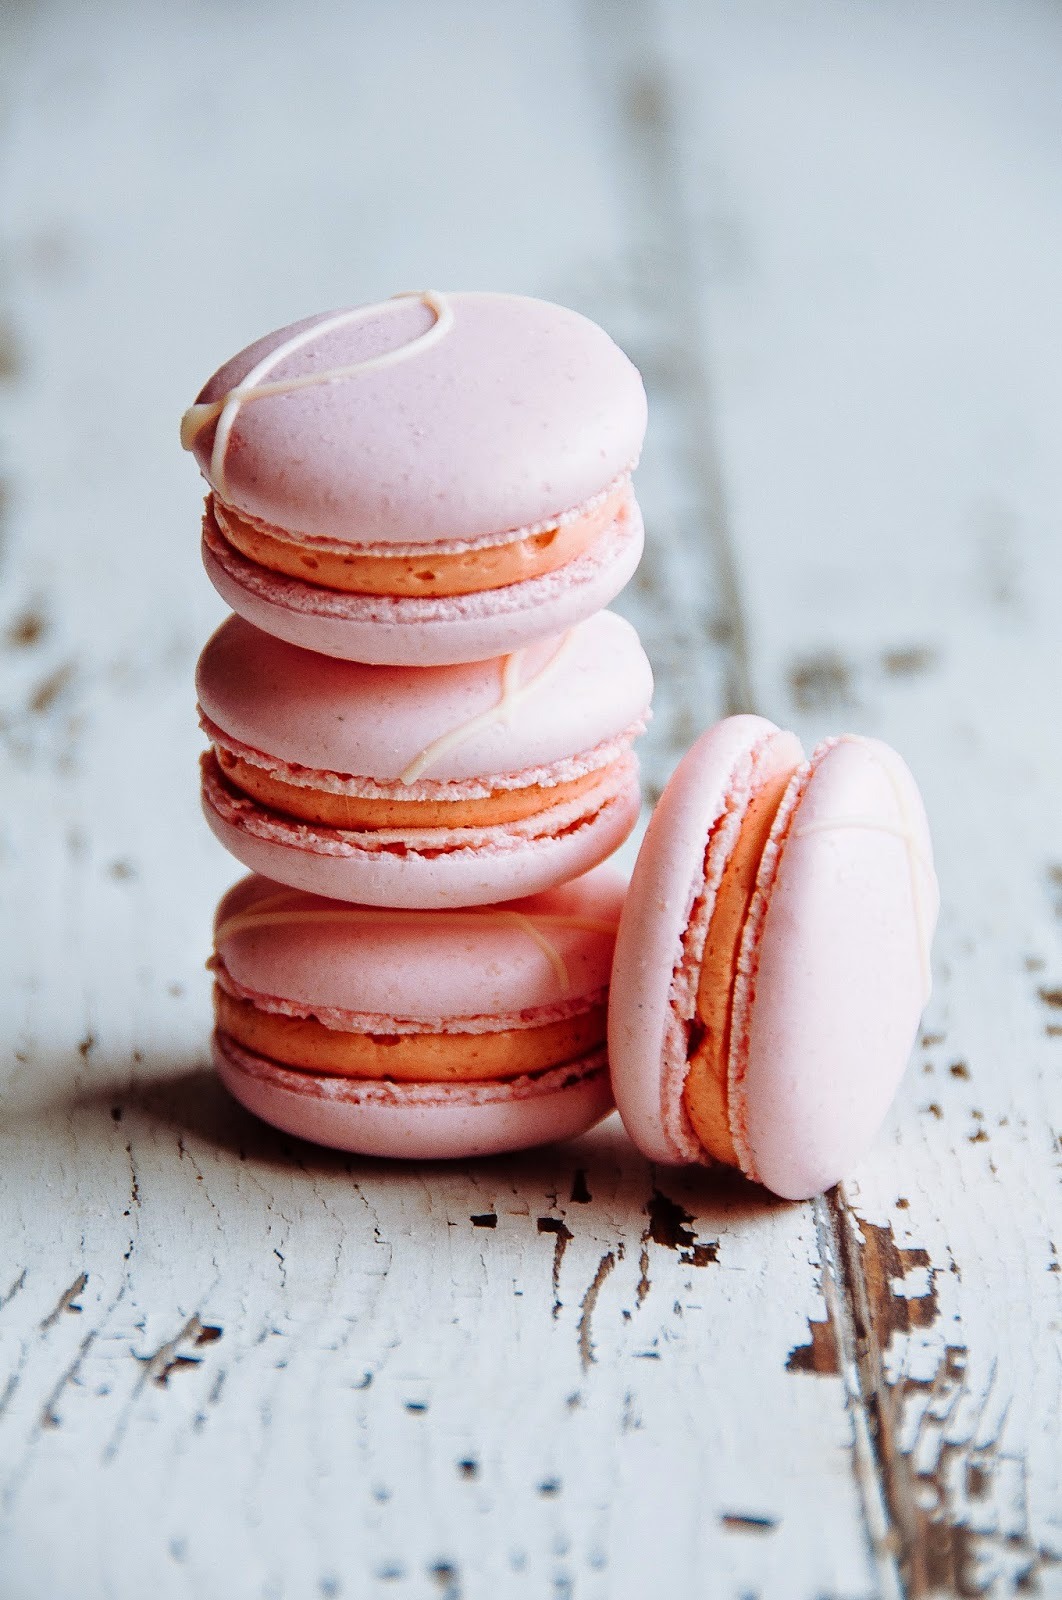 STRAWBERRY PASSION FRUIT MACARONS